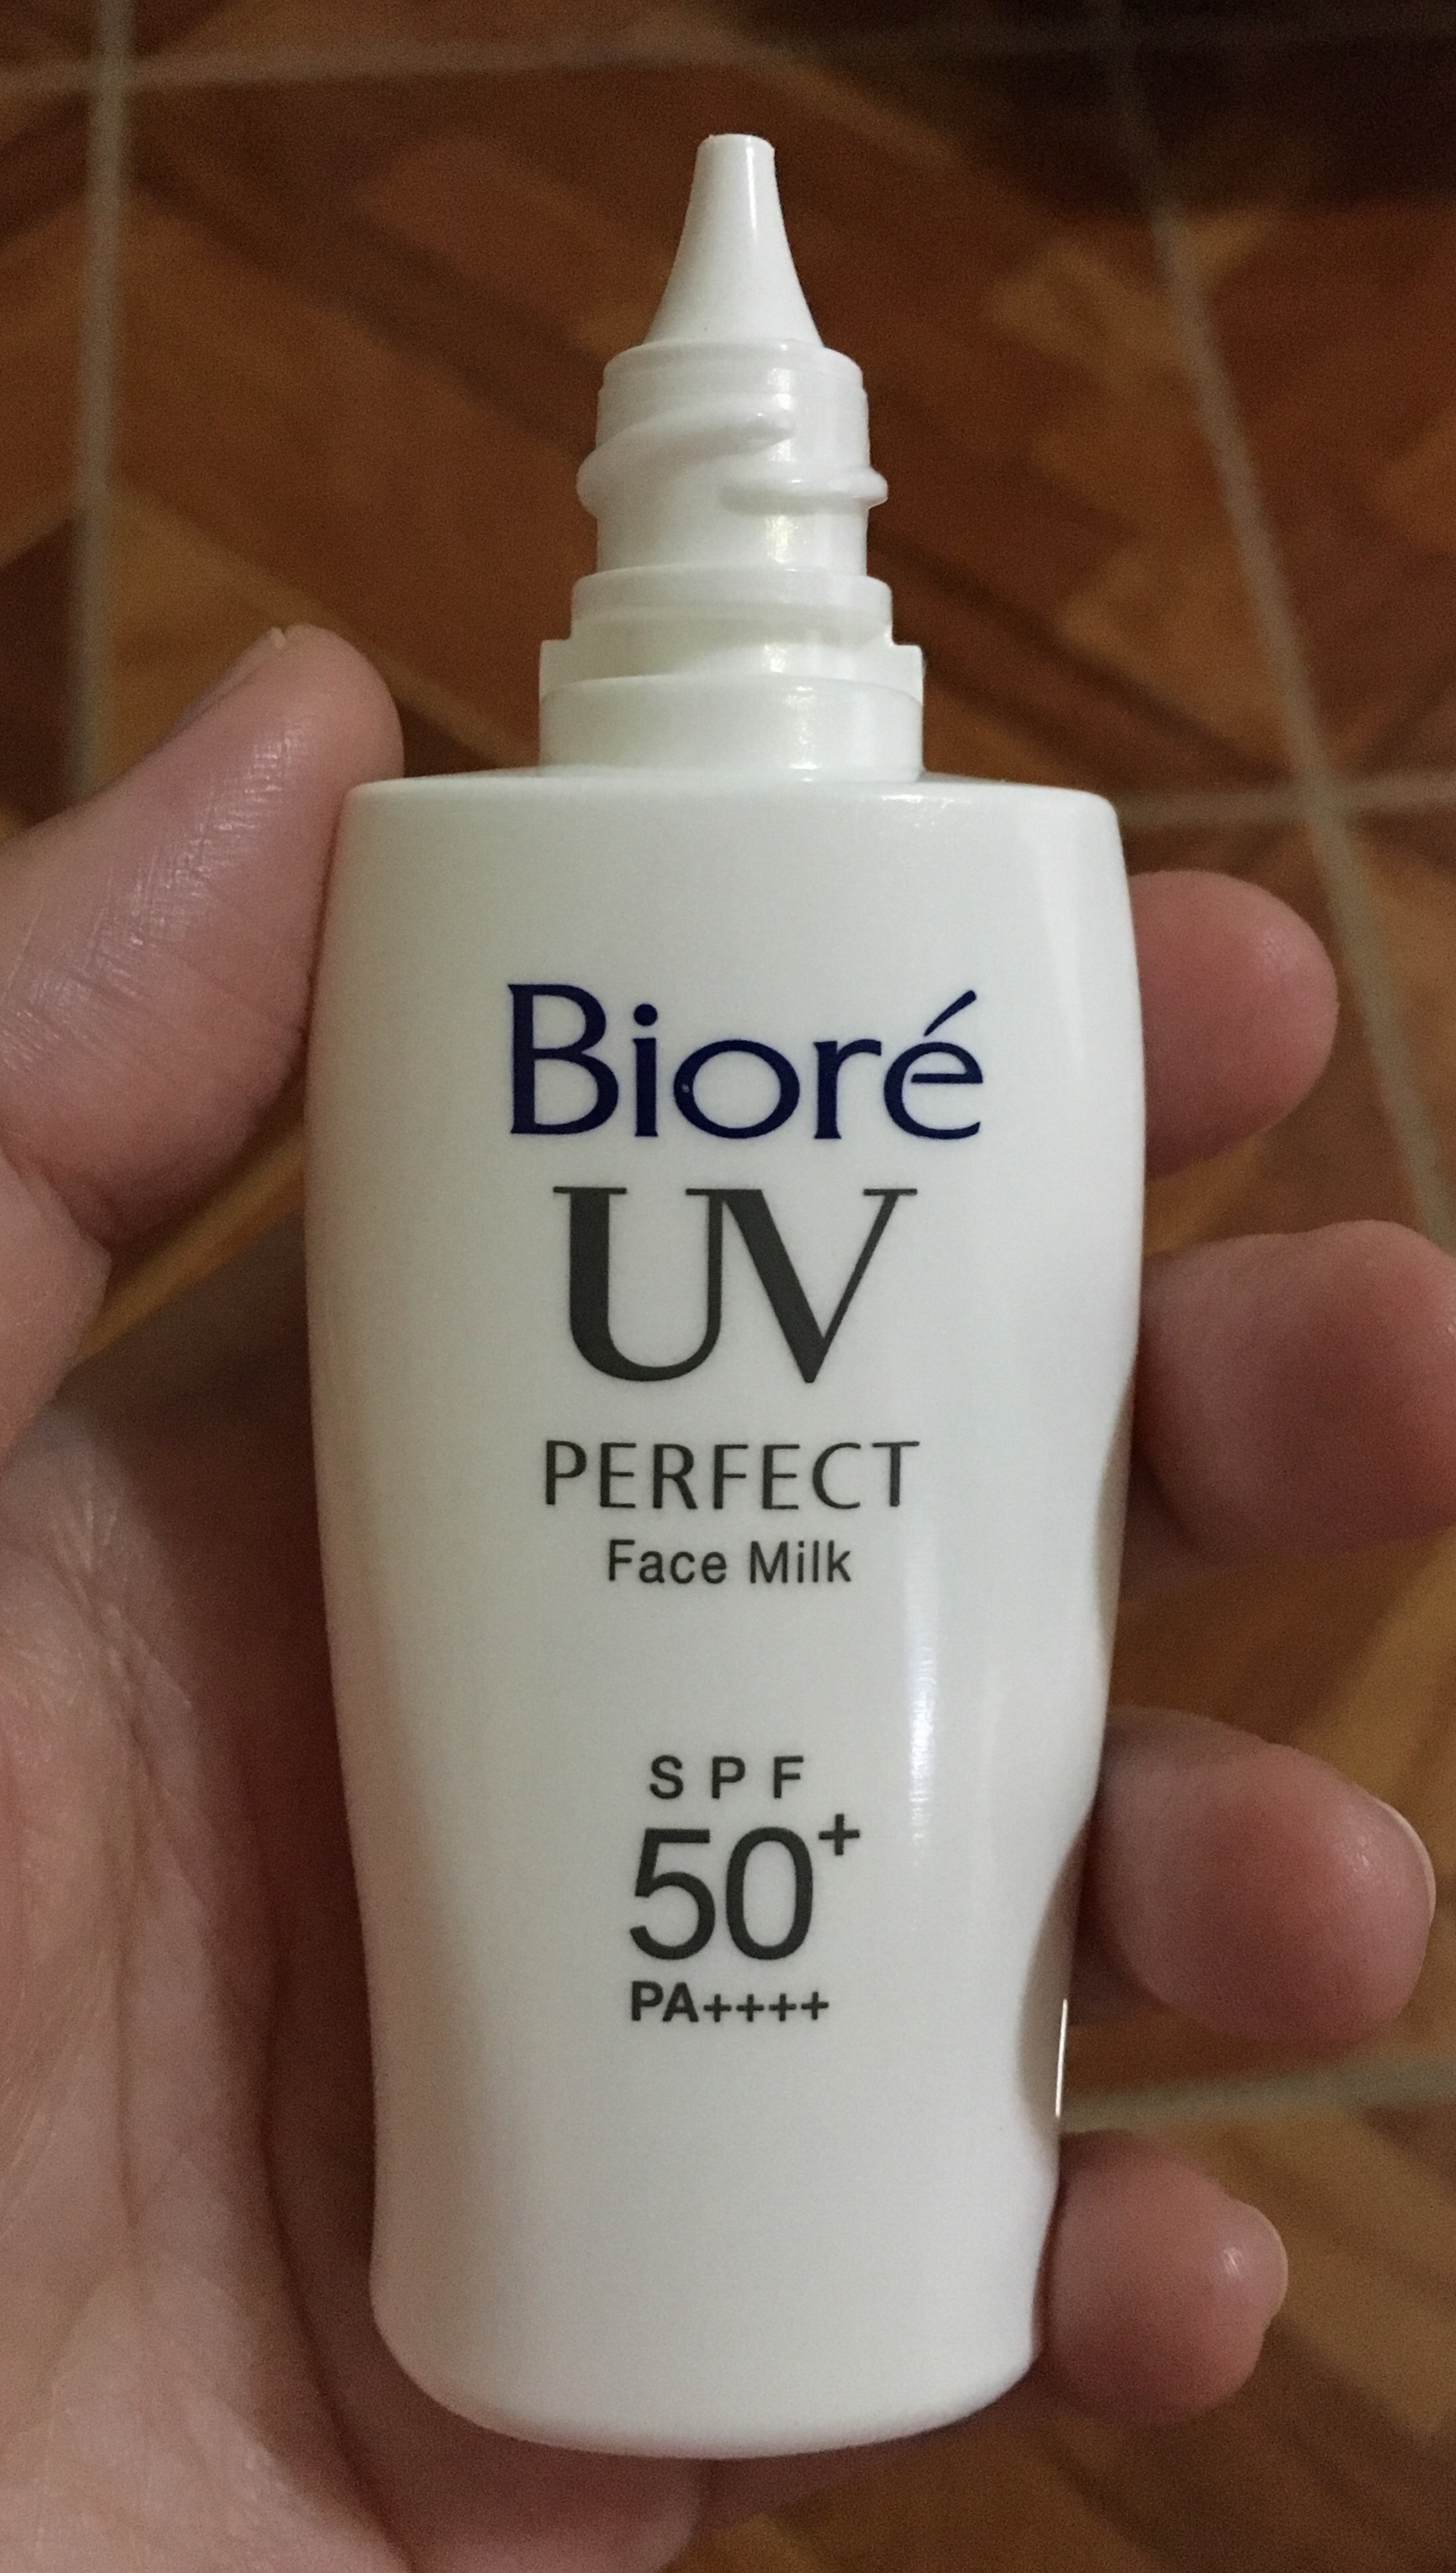 Biore UV Perfect Face Milk SPF 50 PA++++ Review - REVIEWS ...